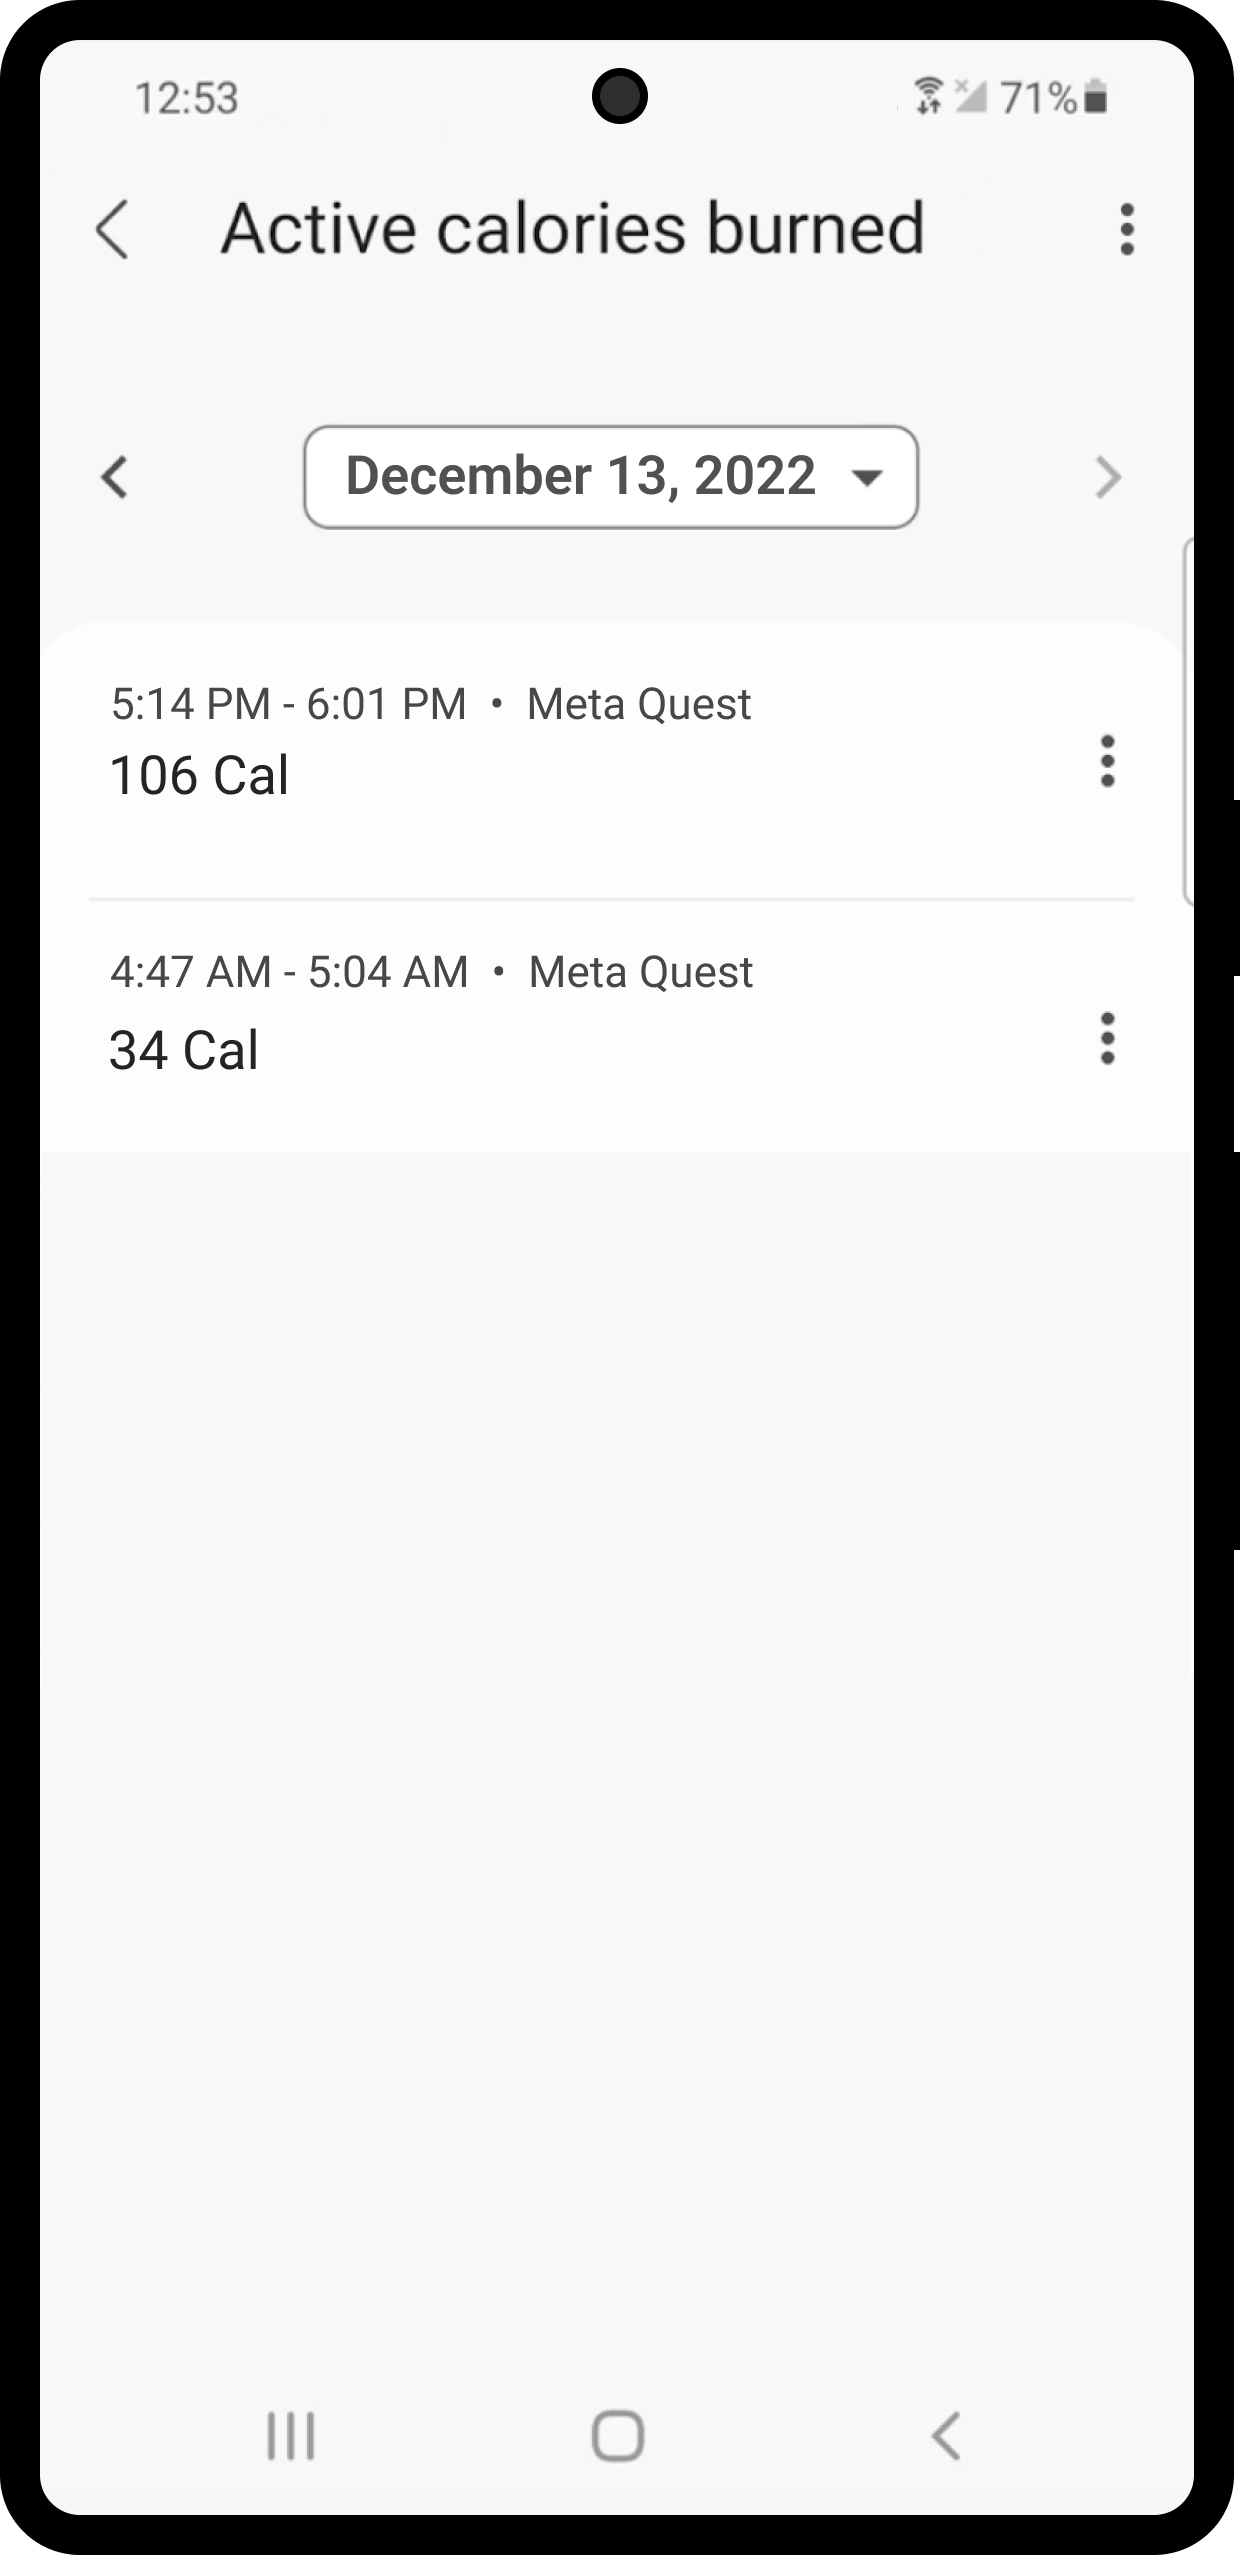 Meta Quest Move adds support for Health Connect syncing on Android